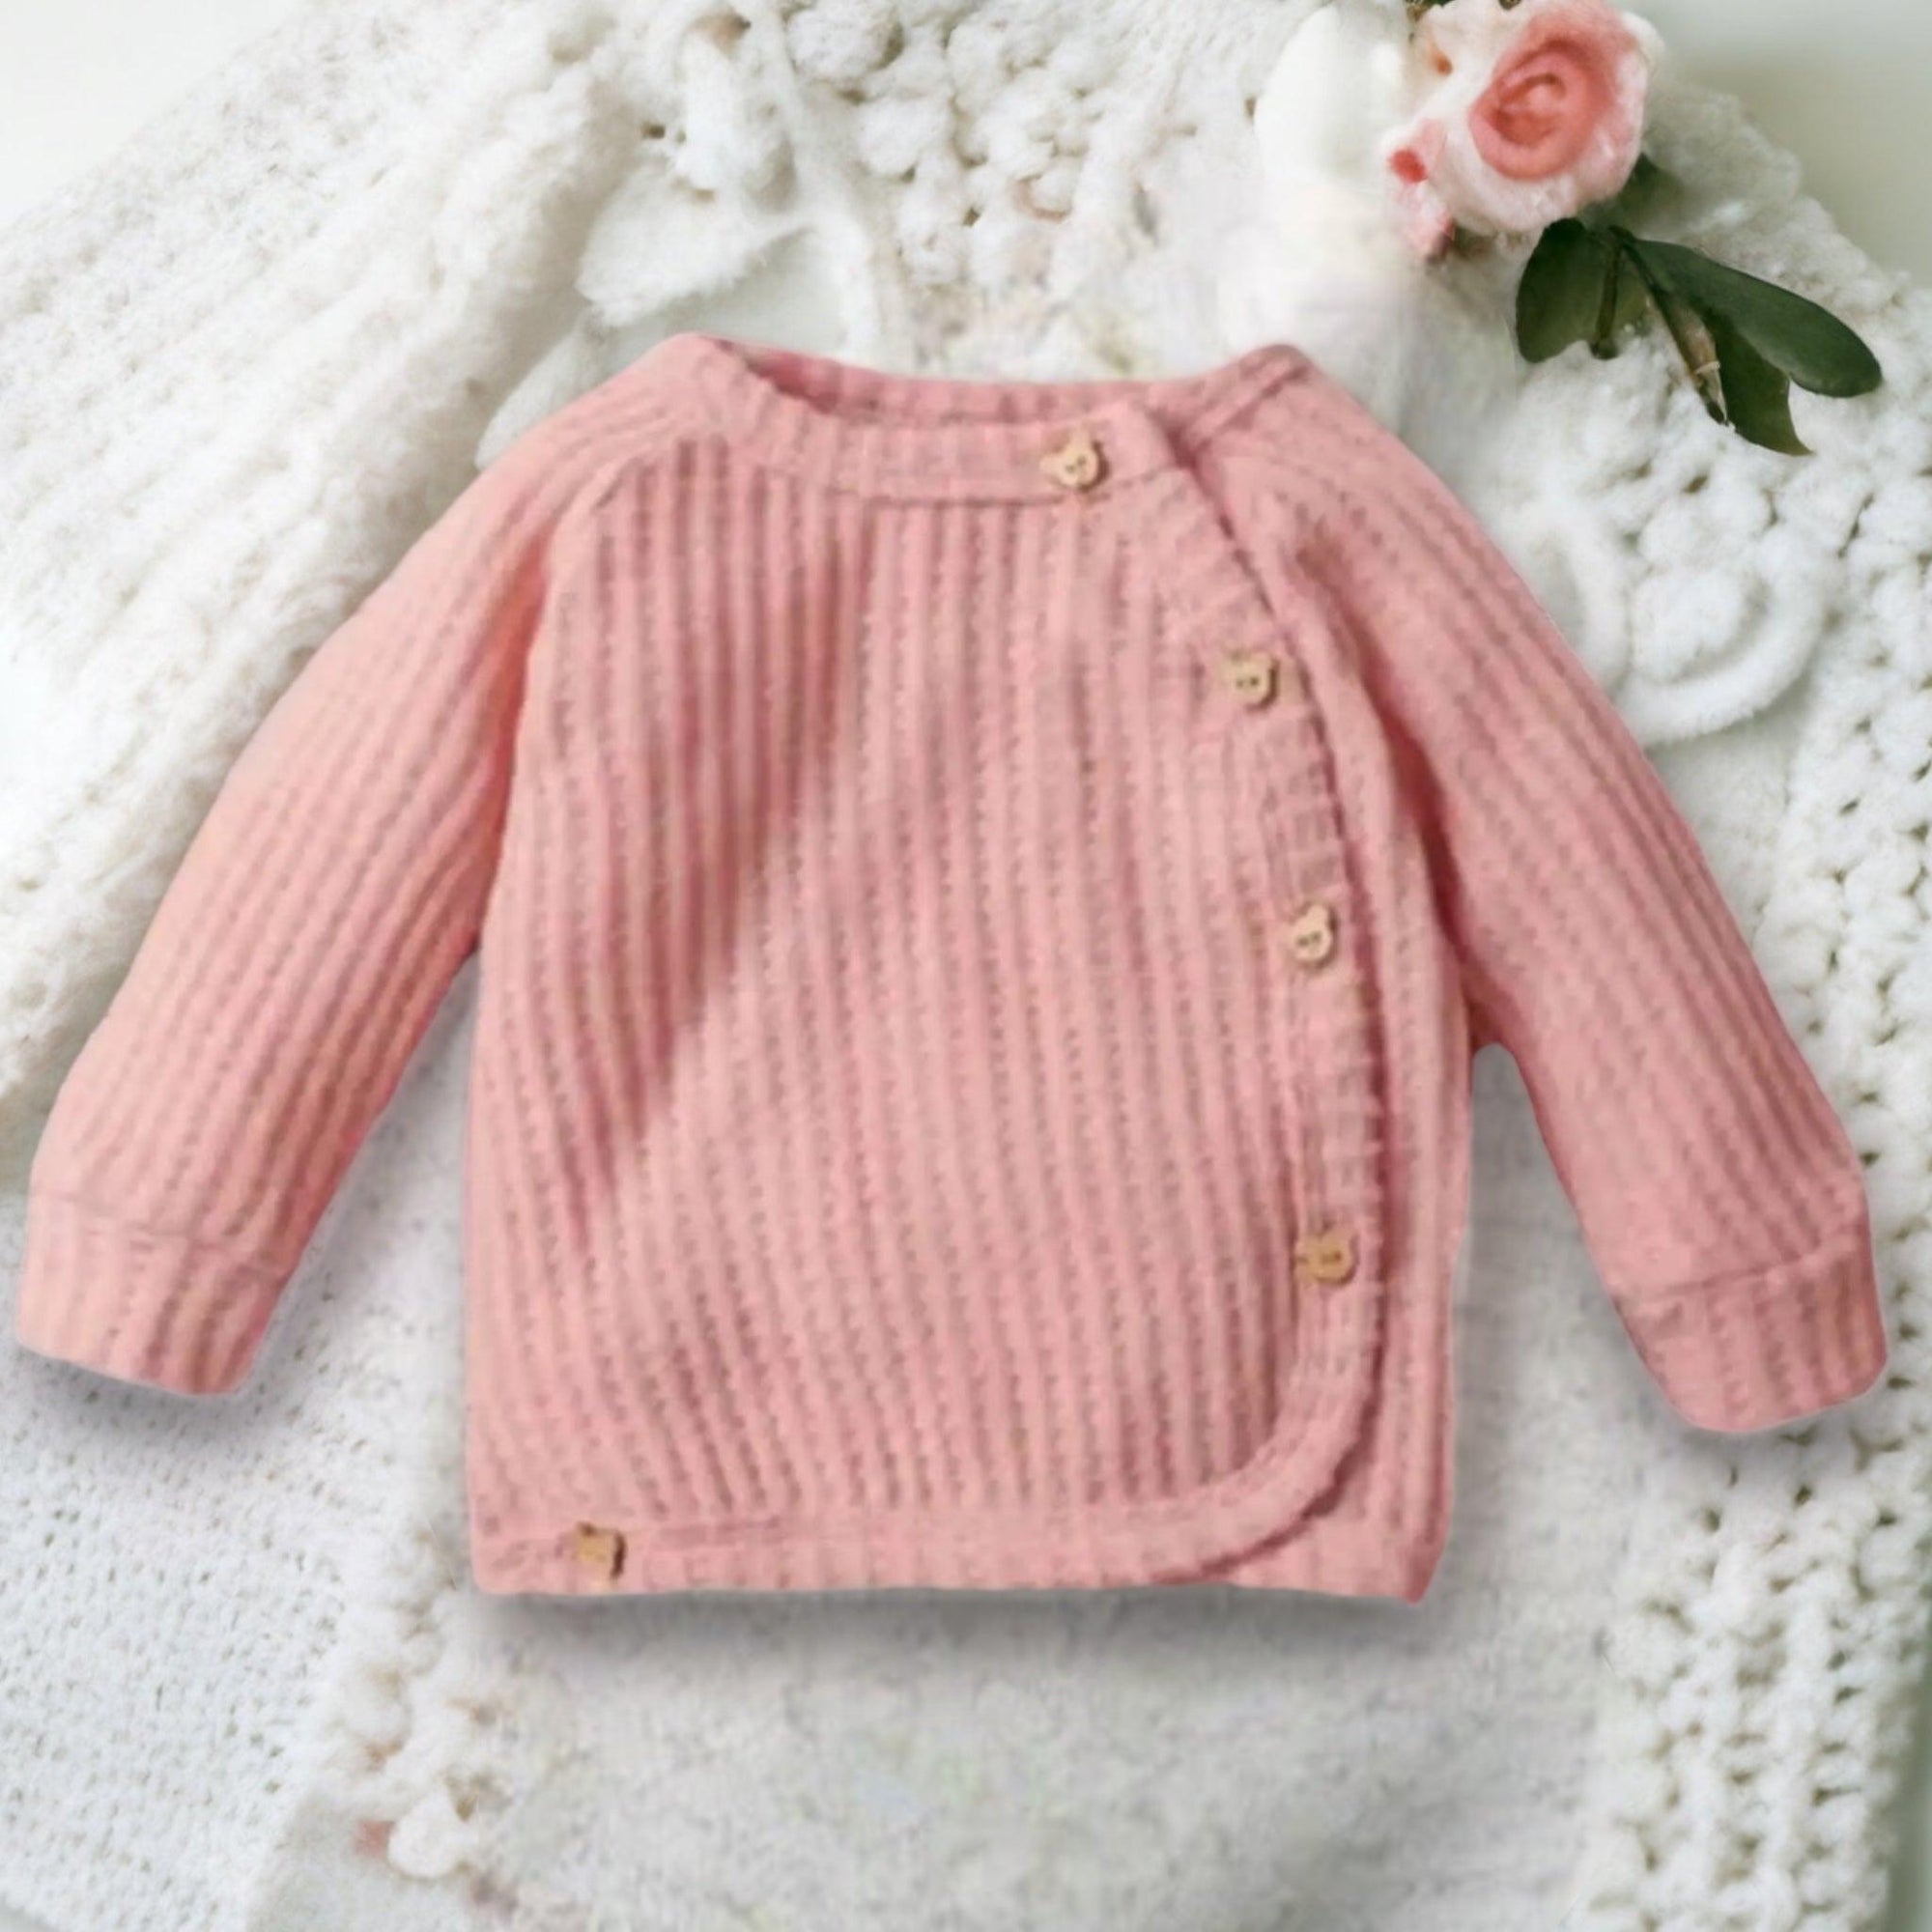 Baby Toddler Girls Pink Knit Sweater Three Piece Clothing Set, Color